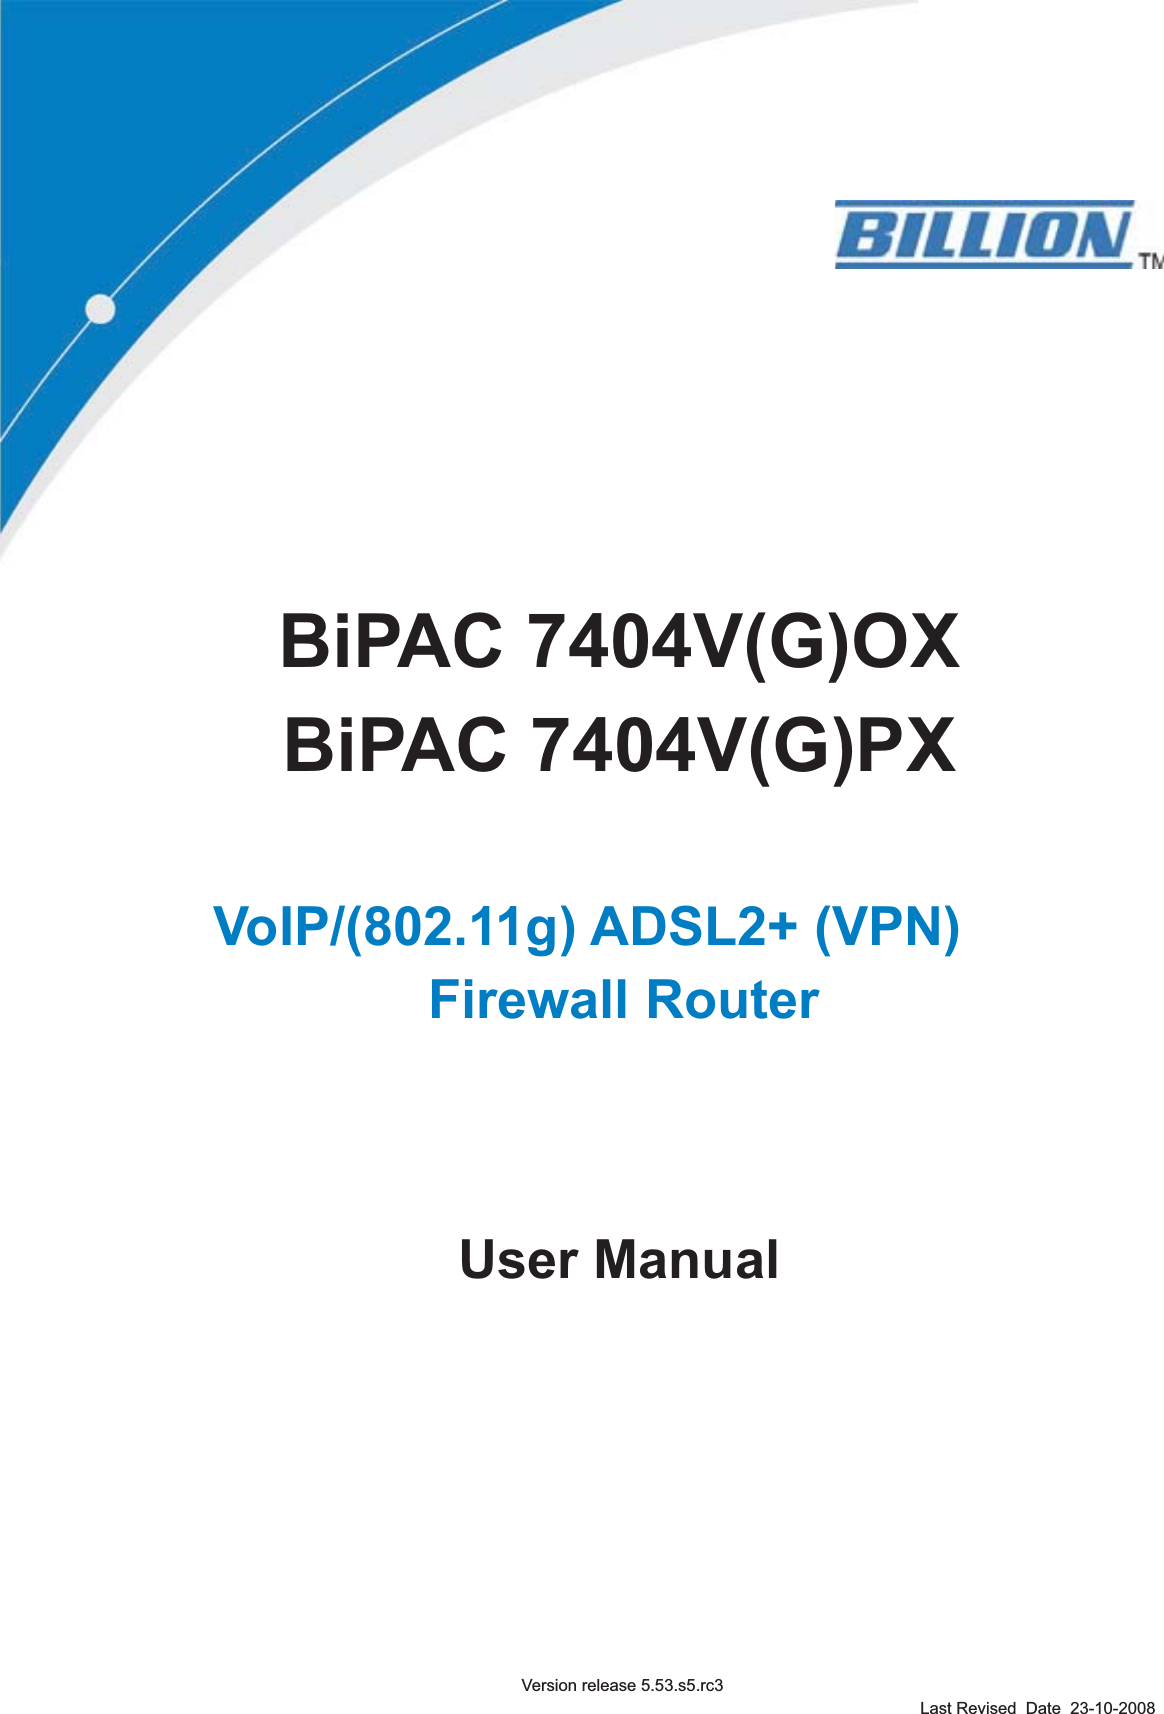 BiPAC 7404V(G)OXBiPAC 7404V(G)PXVoIP/(802.11g) ADSL2+ (VPN)Firewall Router User ManualLast Revised  Date  23-10-2008Version release 5.53.s5.rc3